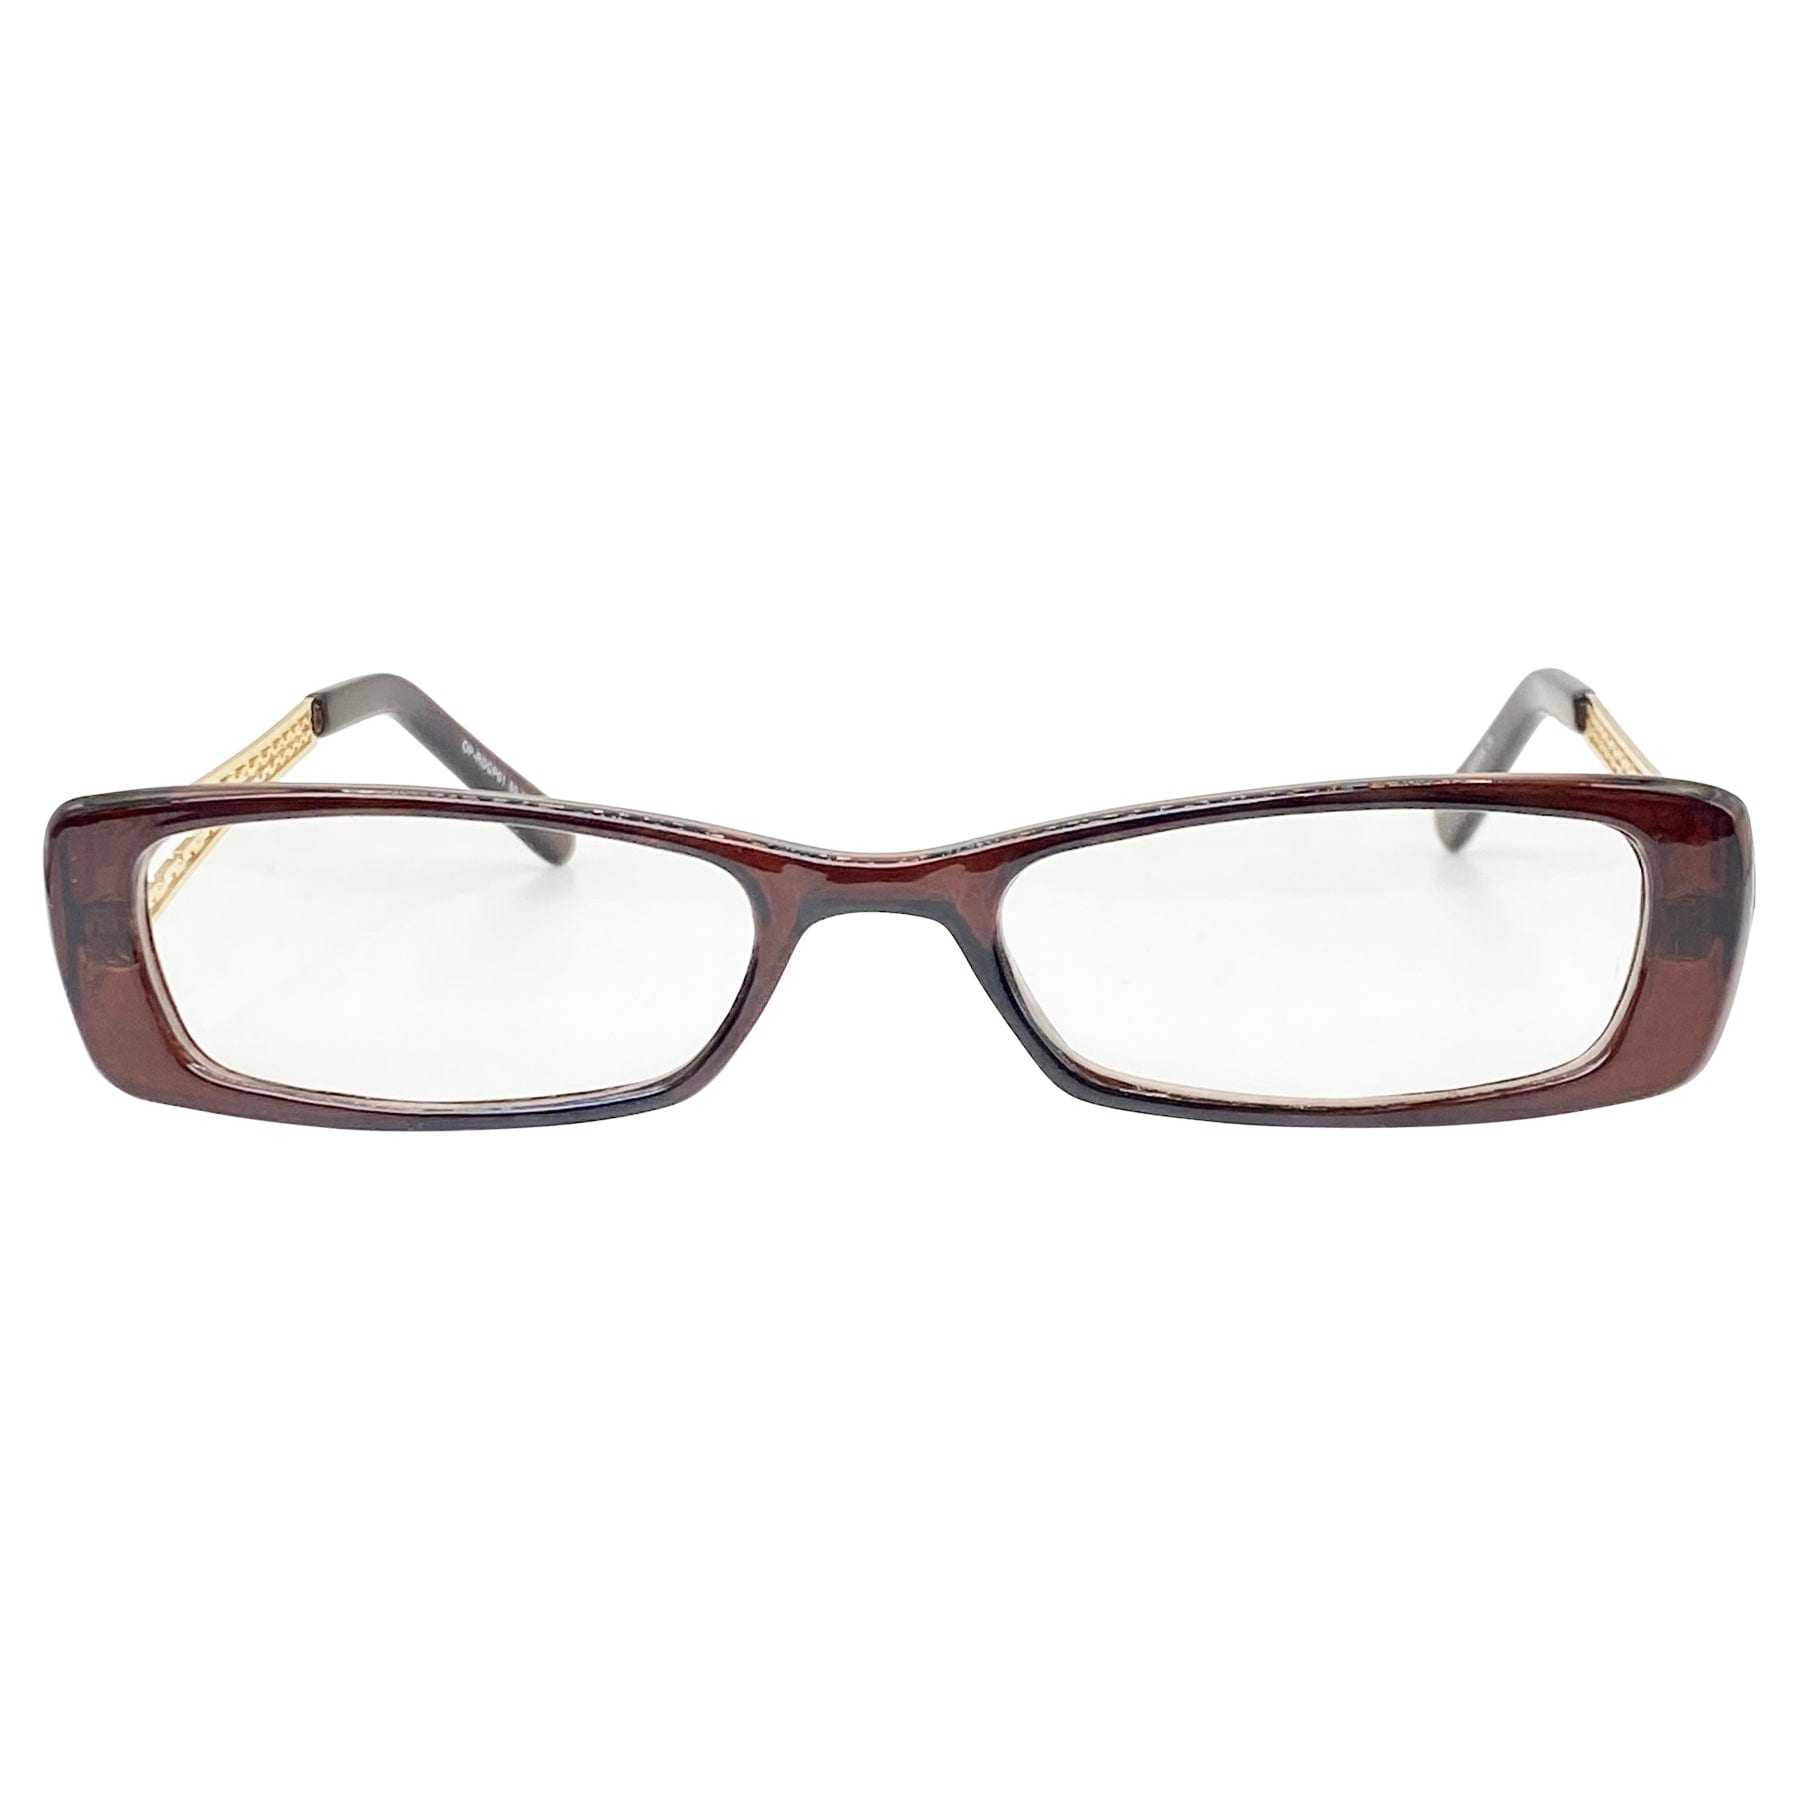 90s style vintage glasses with a rectangular shape